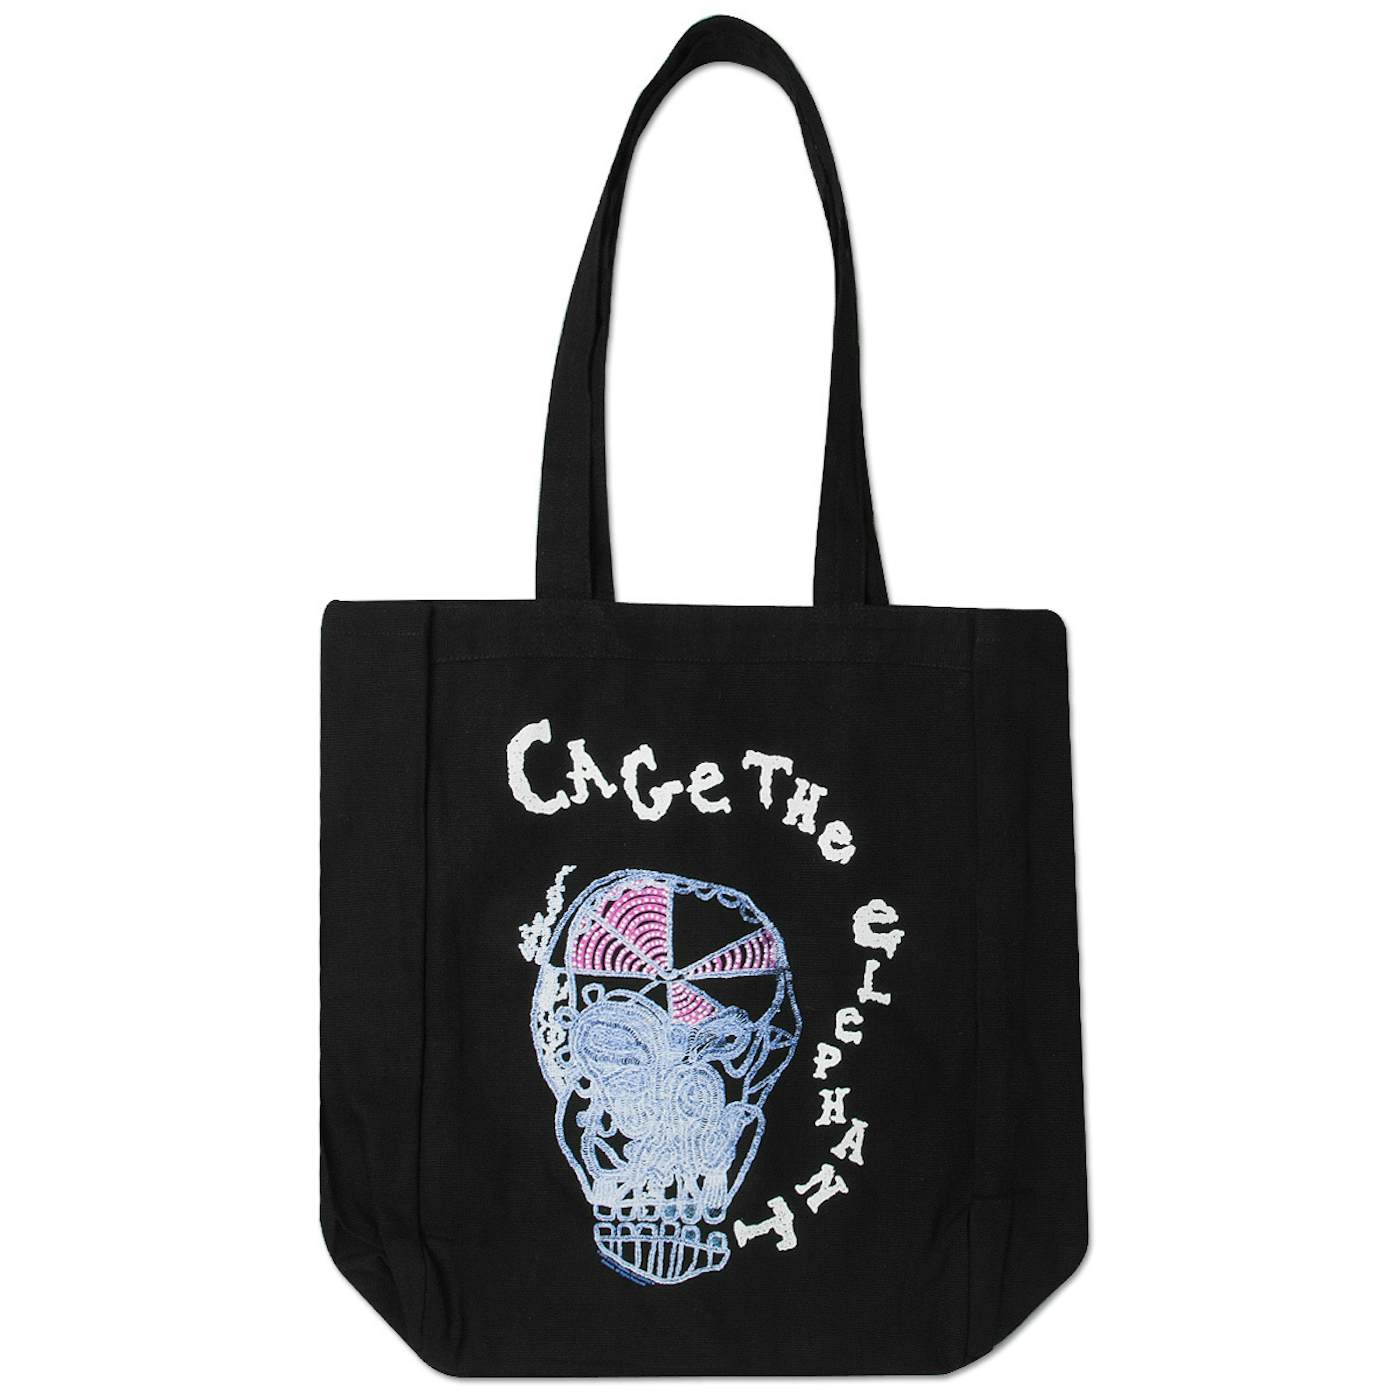 Cage The Elephant Eating Logo Canvas Tote Bag